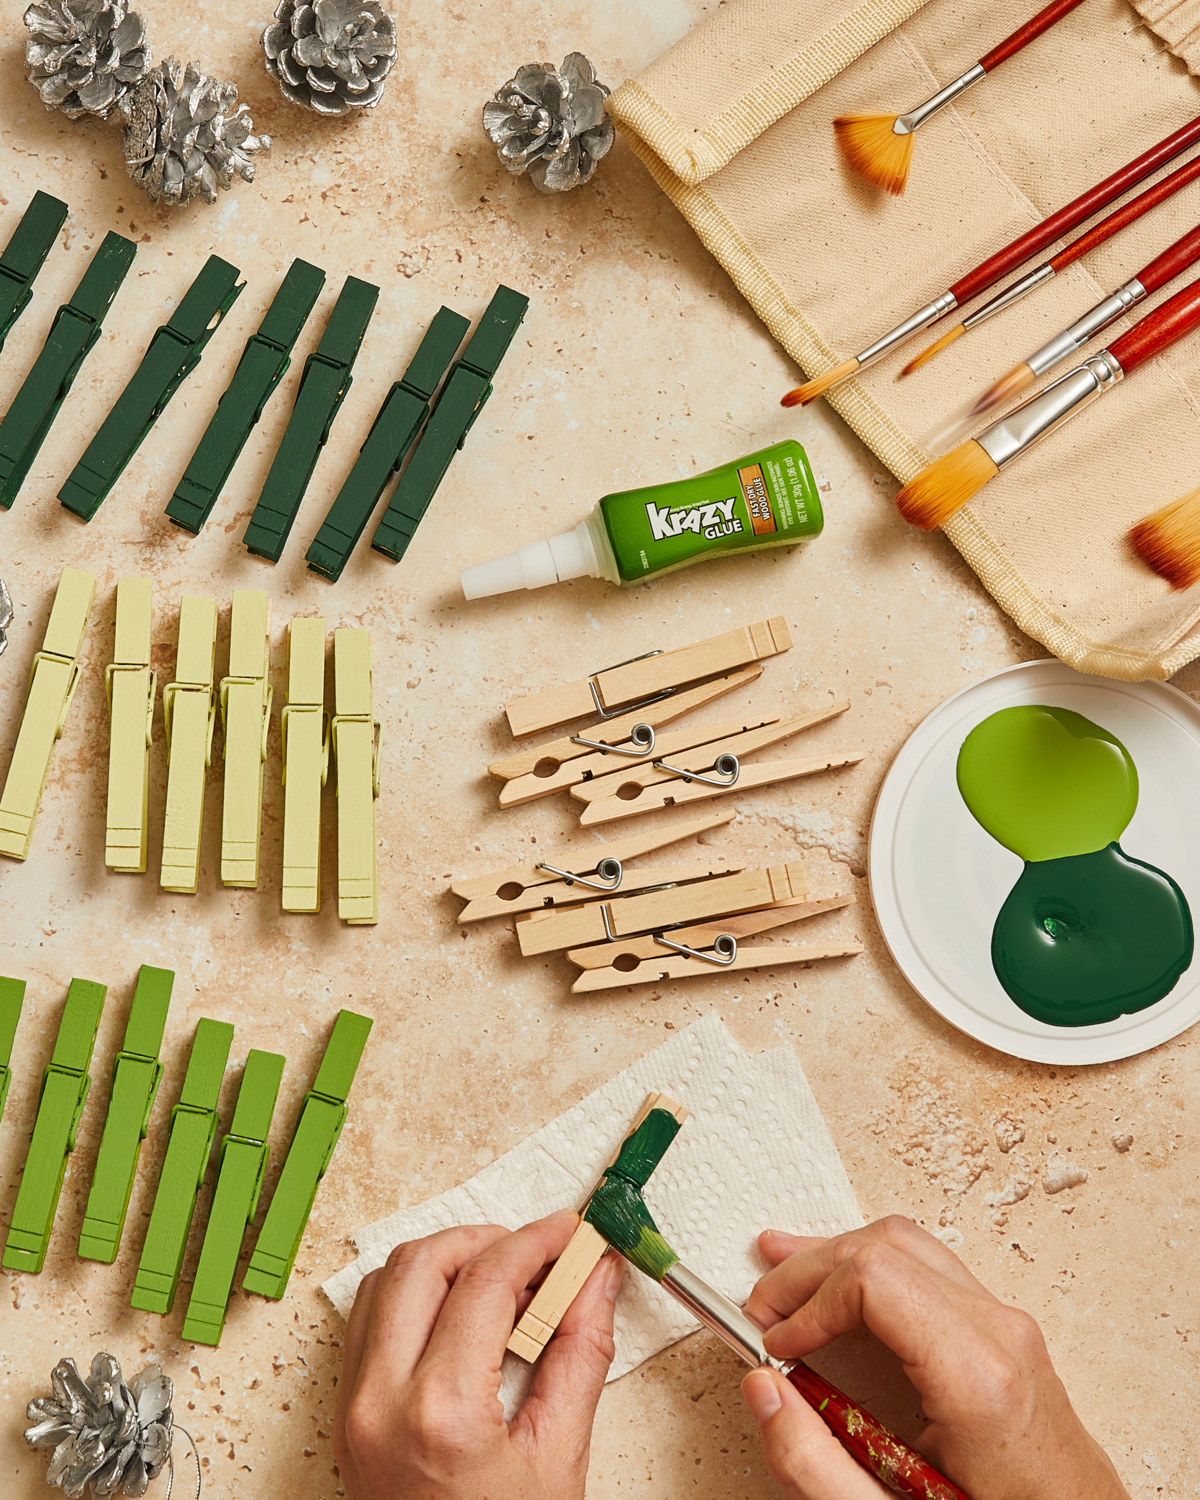 Clothespins, paintbrushes, and green paint laid out. Person is painting one of the clothespins green. Bottle of Krazy Glue off to the side.